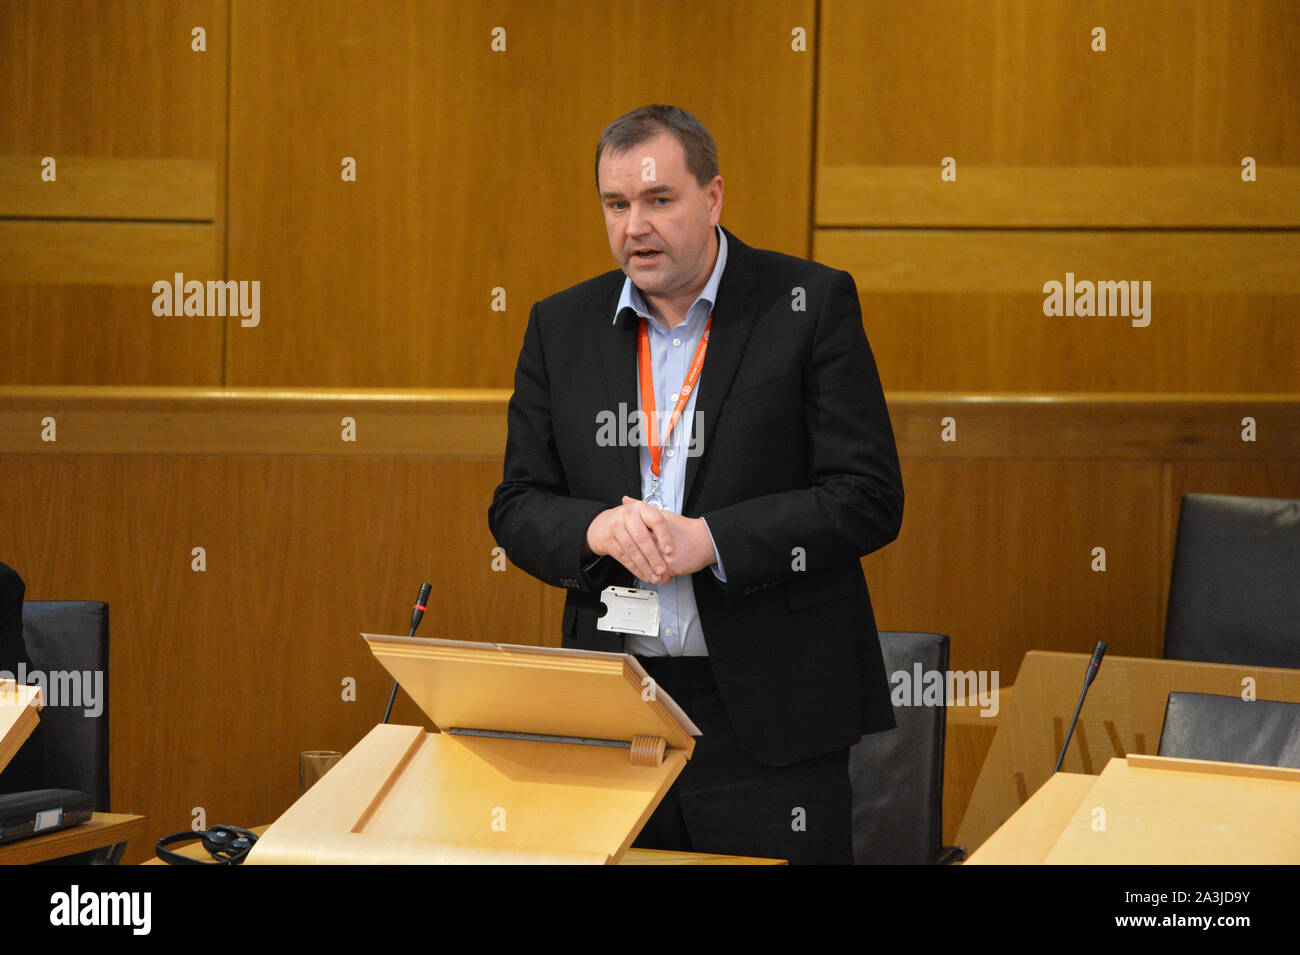 Edinburgh, 8 October 2019.  Pictured: Scottish Labour Party, Neil Findlay MSP. A report has been published detailing the range of measures being put in place by the Scottish Government to mitigate a ‘no deal’ Brexit. In a statement to the Scottish Parliament, Deputy First Minister John Swinney said: “The document we have published today sets out not just the measures we are taking to mitigate the worst impacts of a ‘no deal’ Brexit, but also the areas where we require action from the UK Government. Stock Photo